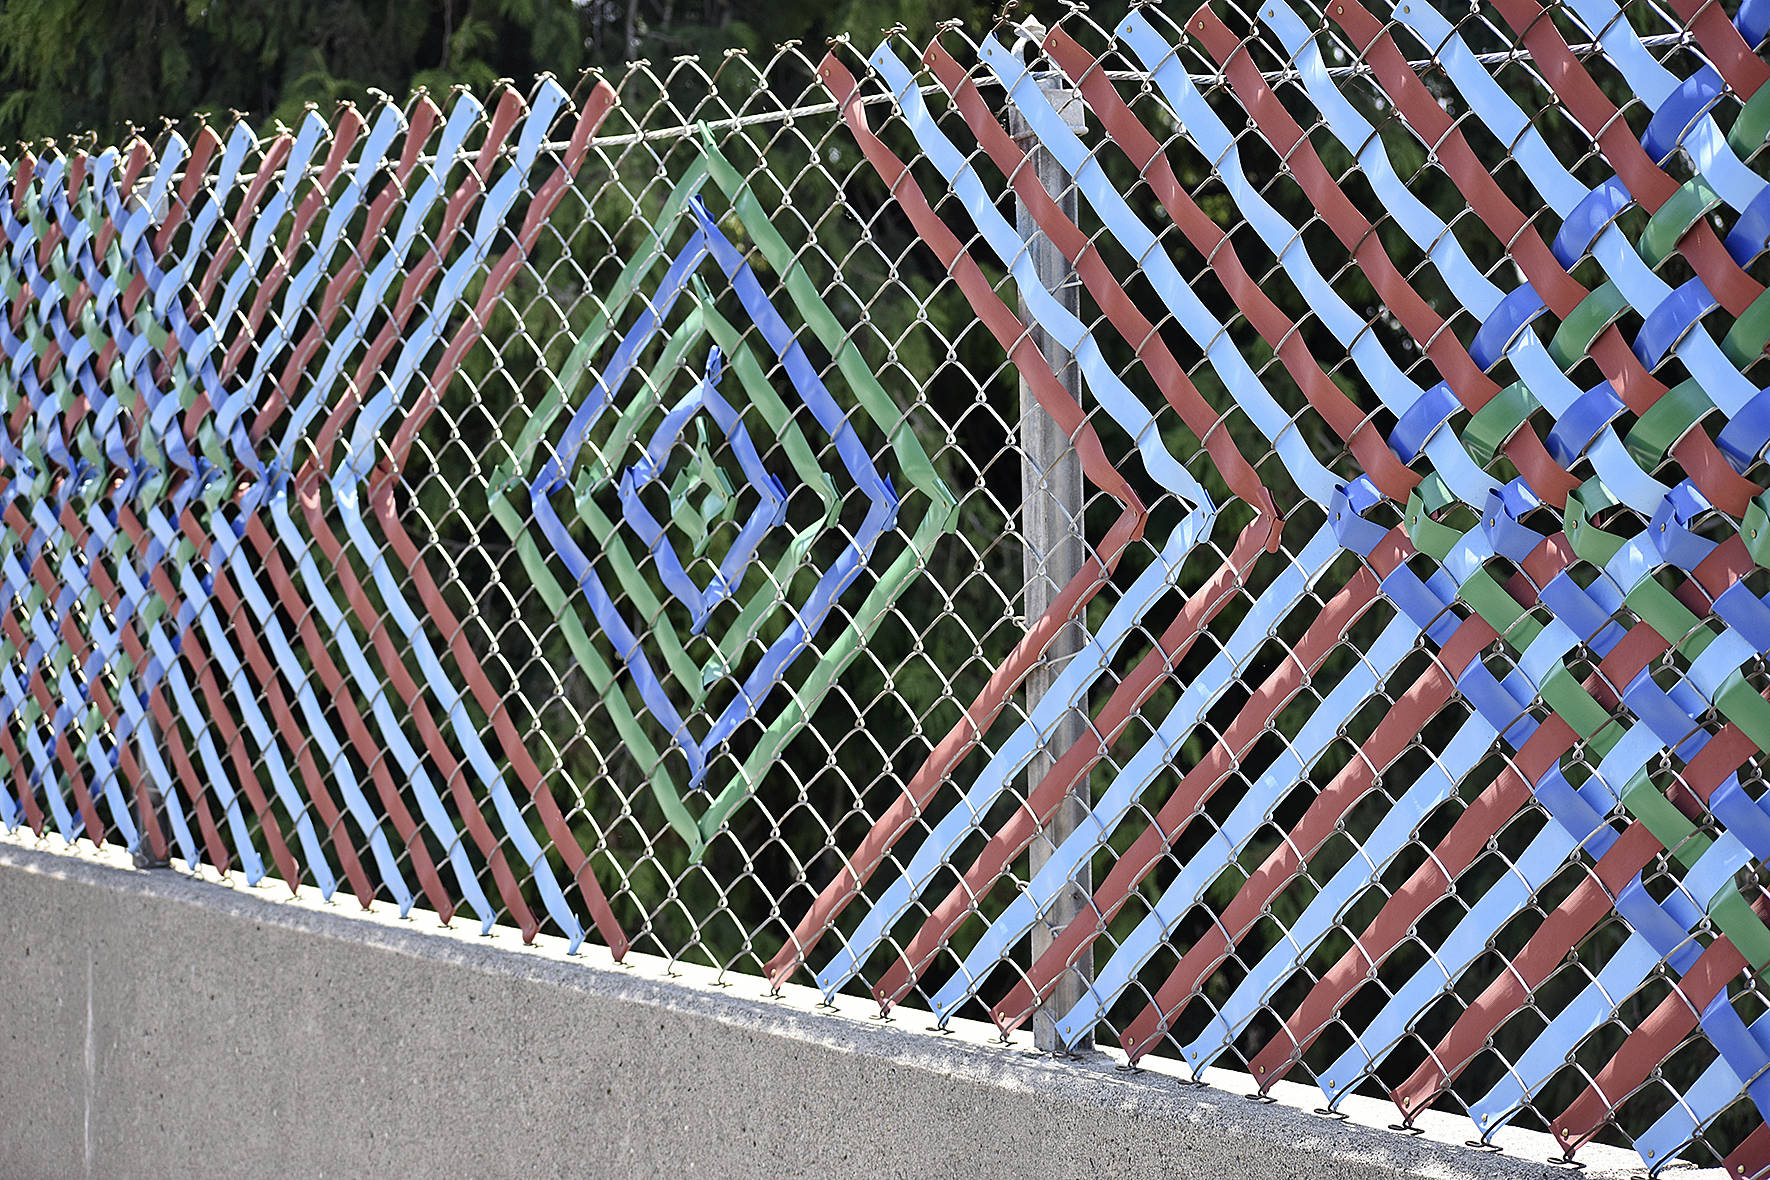 Photo by Haley Ausbun. The fence now has woven with colorful privacy tape, plaques containing six languages and over 100 symbols that were created by students and residents in the Sunset neighborhood.